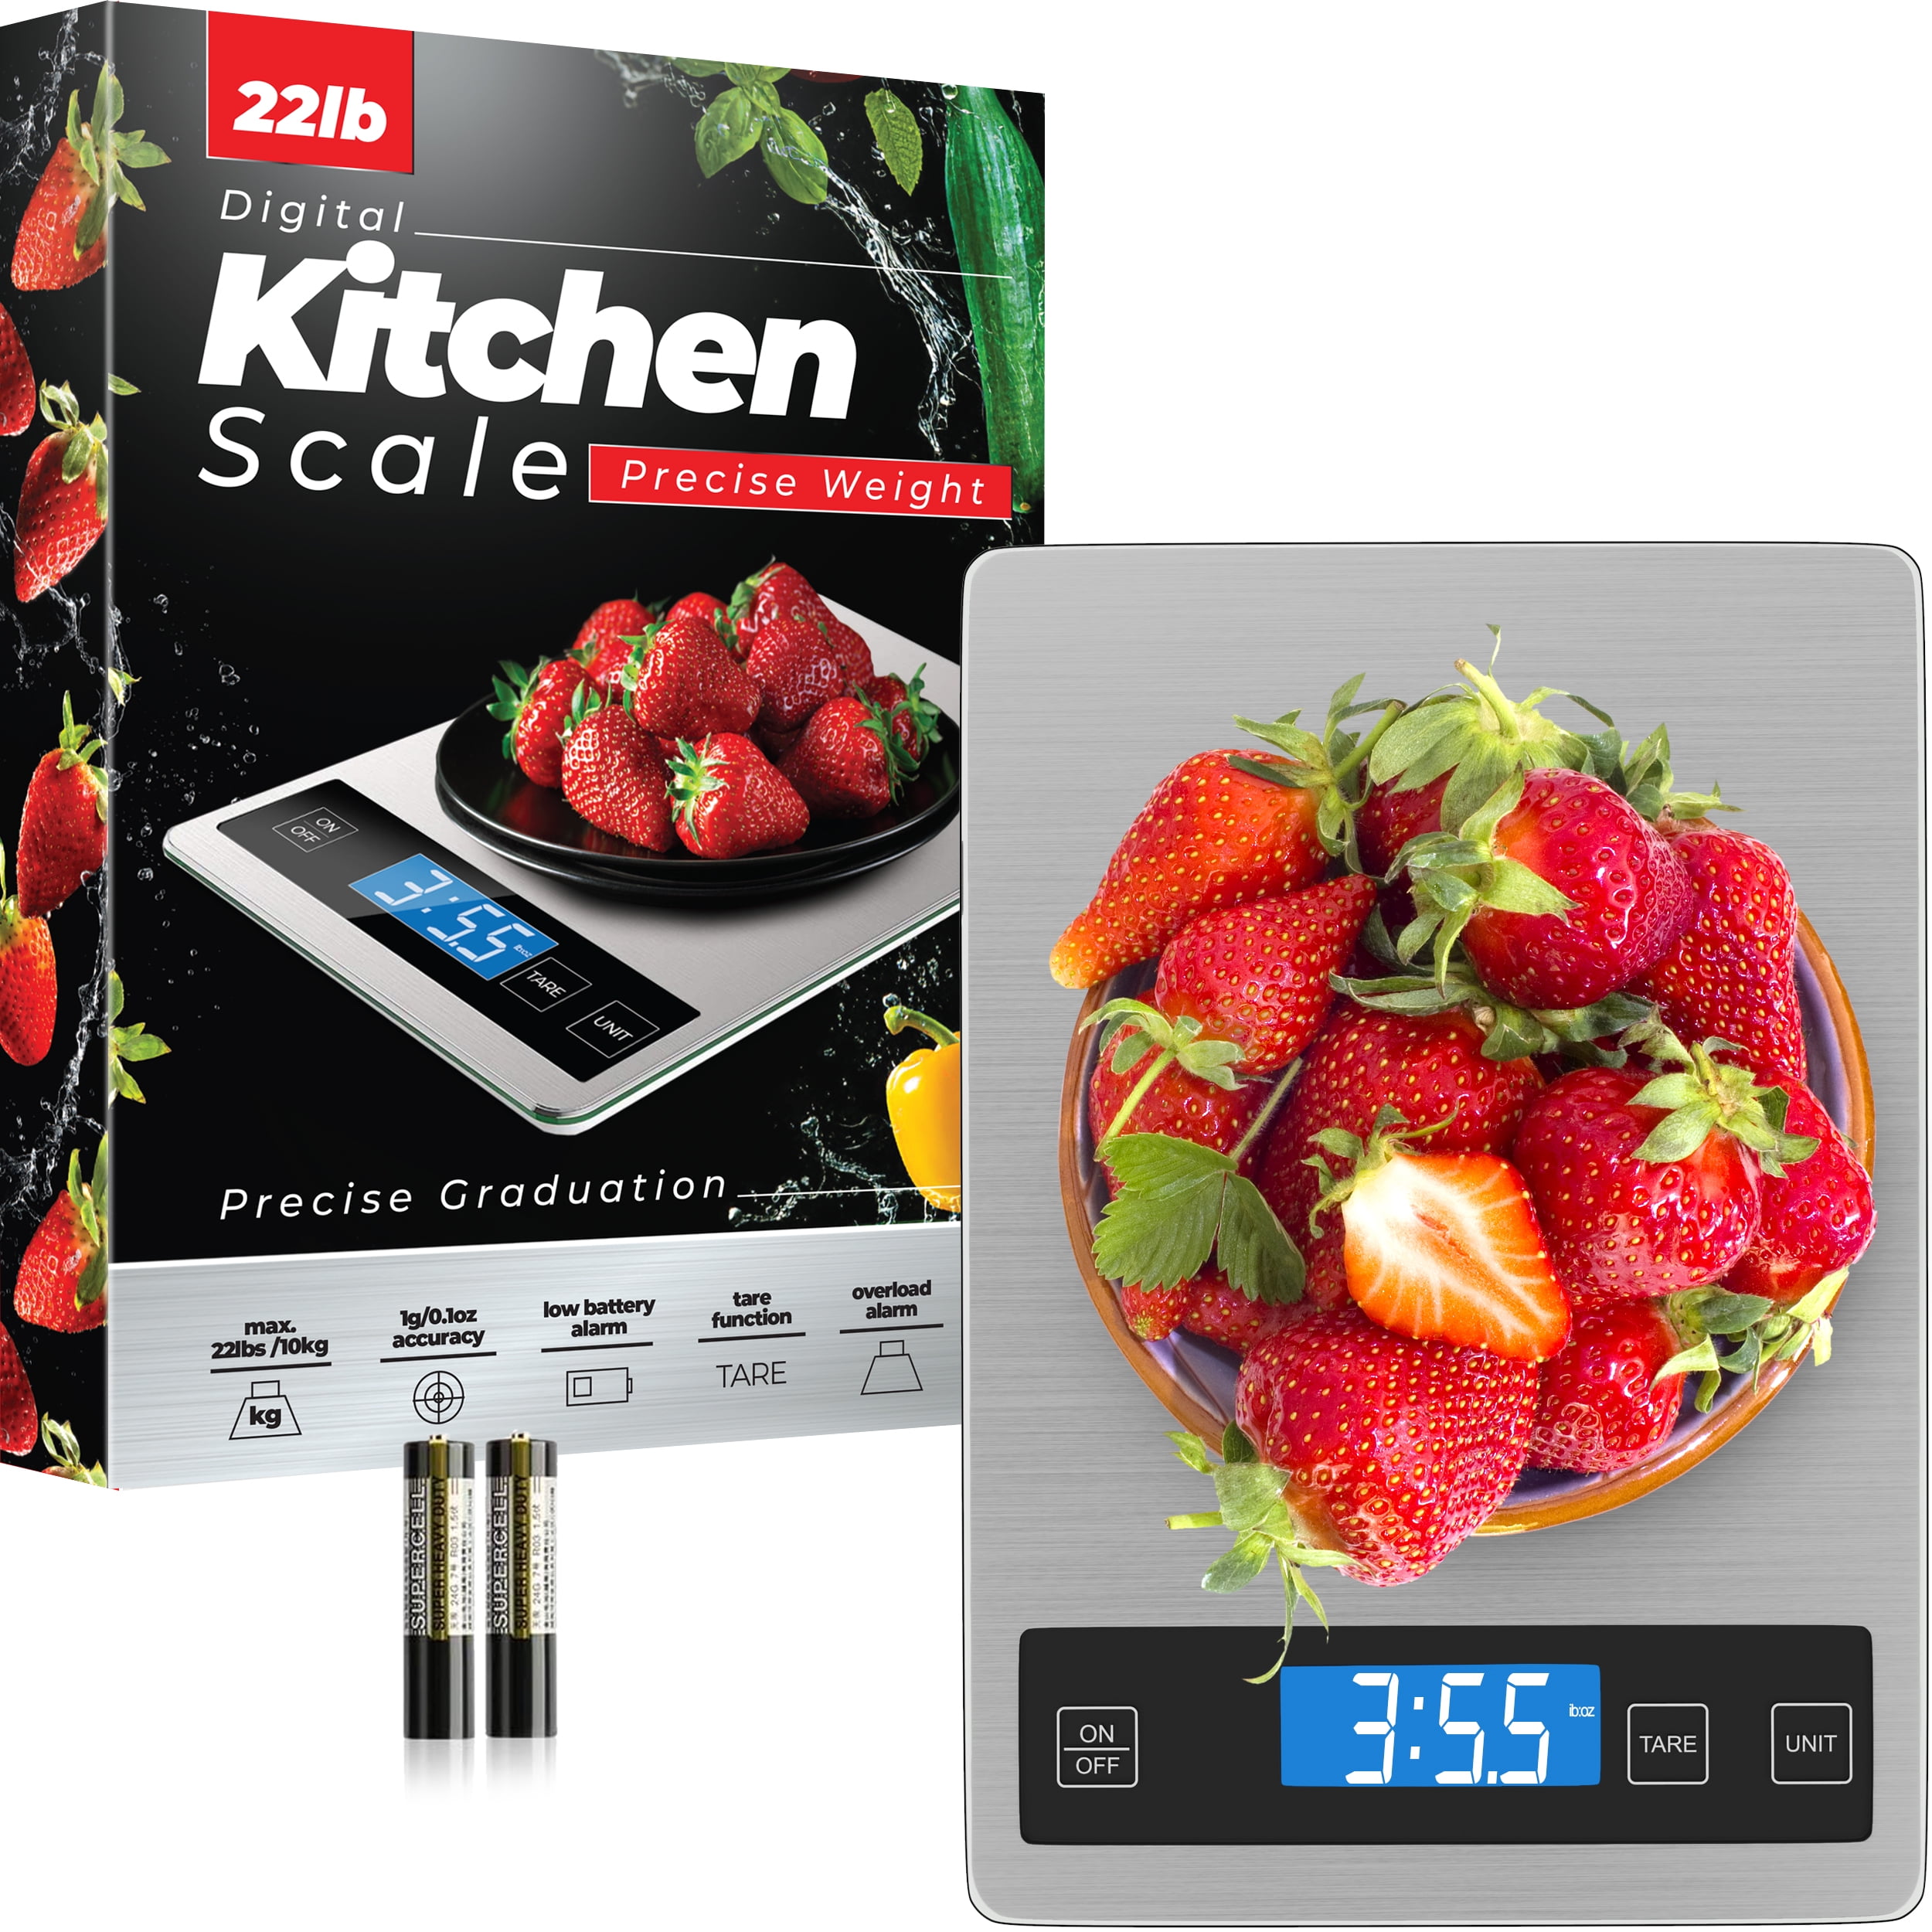 Digital Kitchen Scale for Food Ounces and Grams, Weight Loss